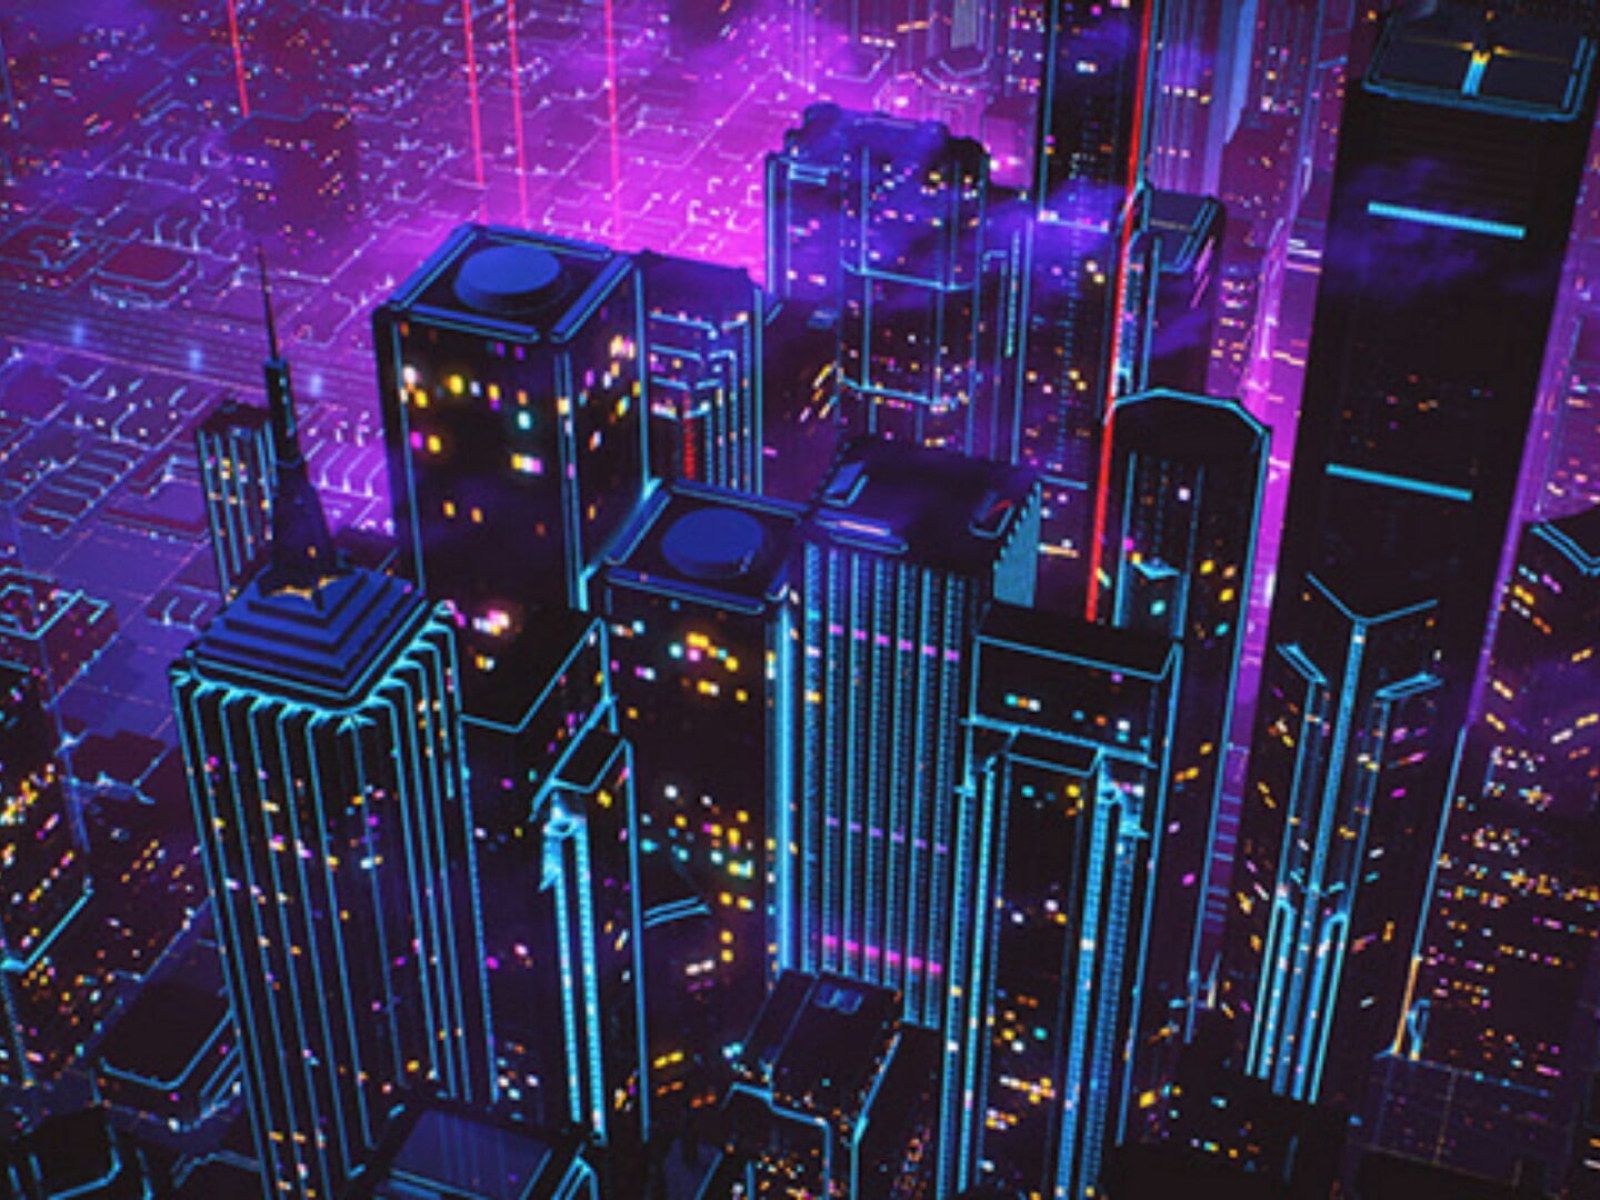 Aesthetic Wallpaper • Special effects city lights artwork electricity psychedelic art wallpaper • Wallpaper For You The Best HD Wallpaper For Desktop & Mobile